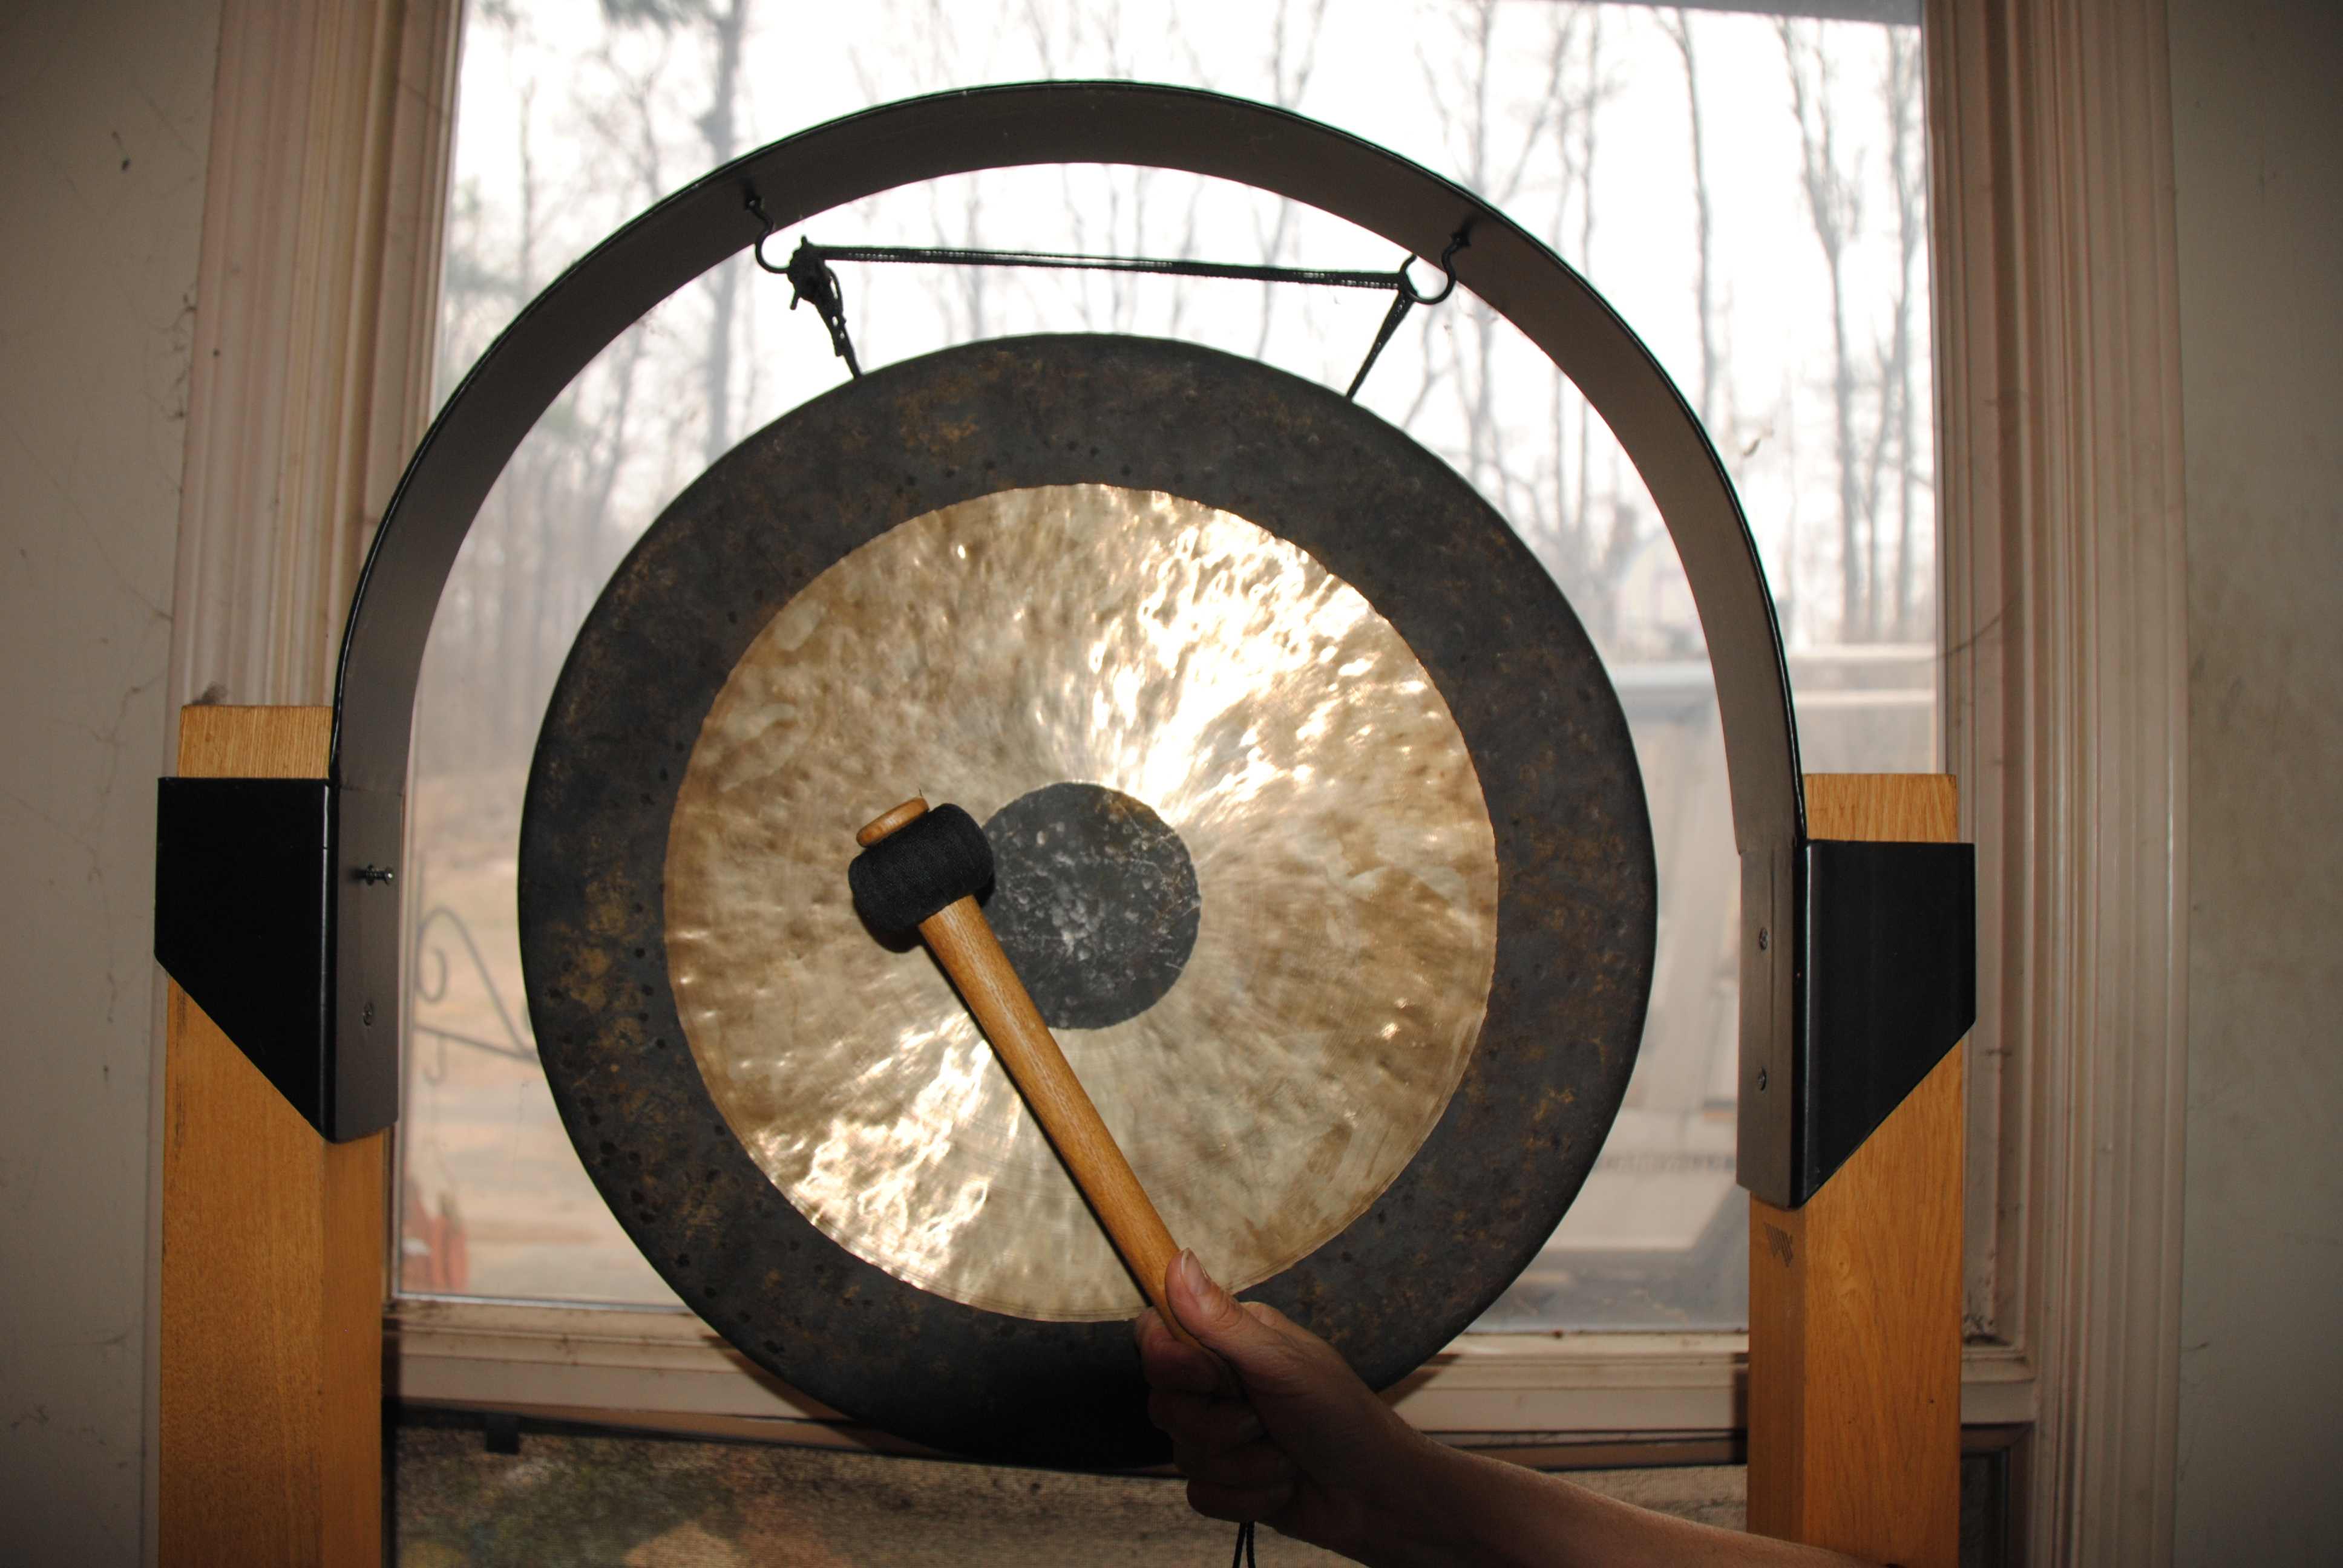 Make Your Own Gong!  Making Multicultural Music